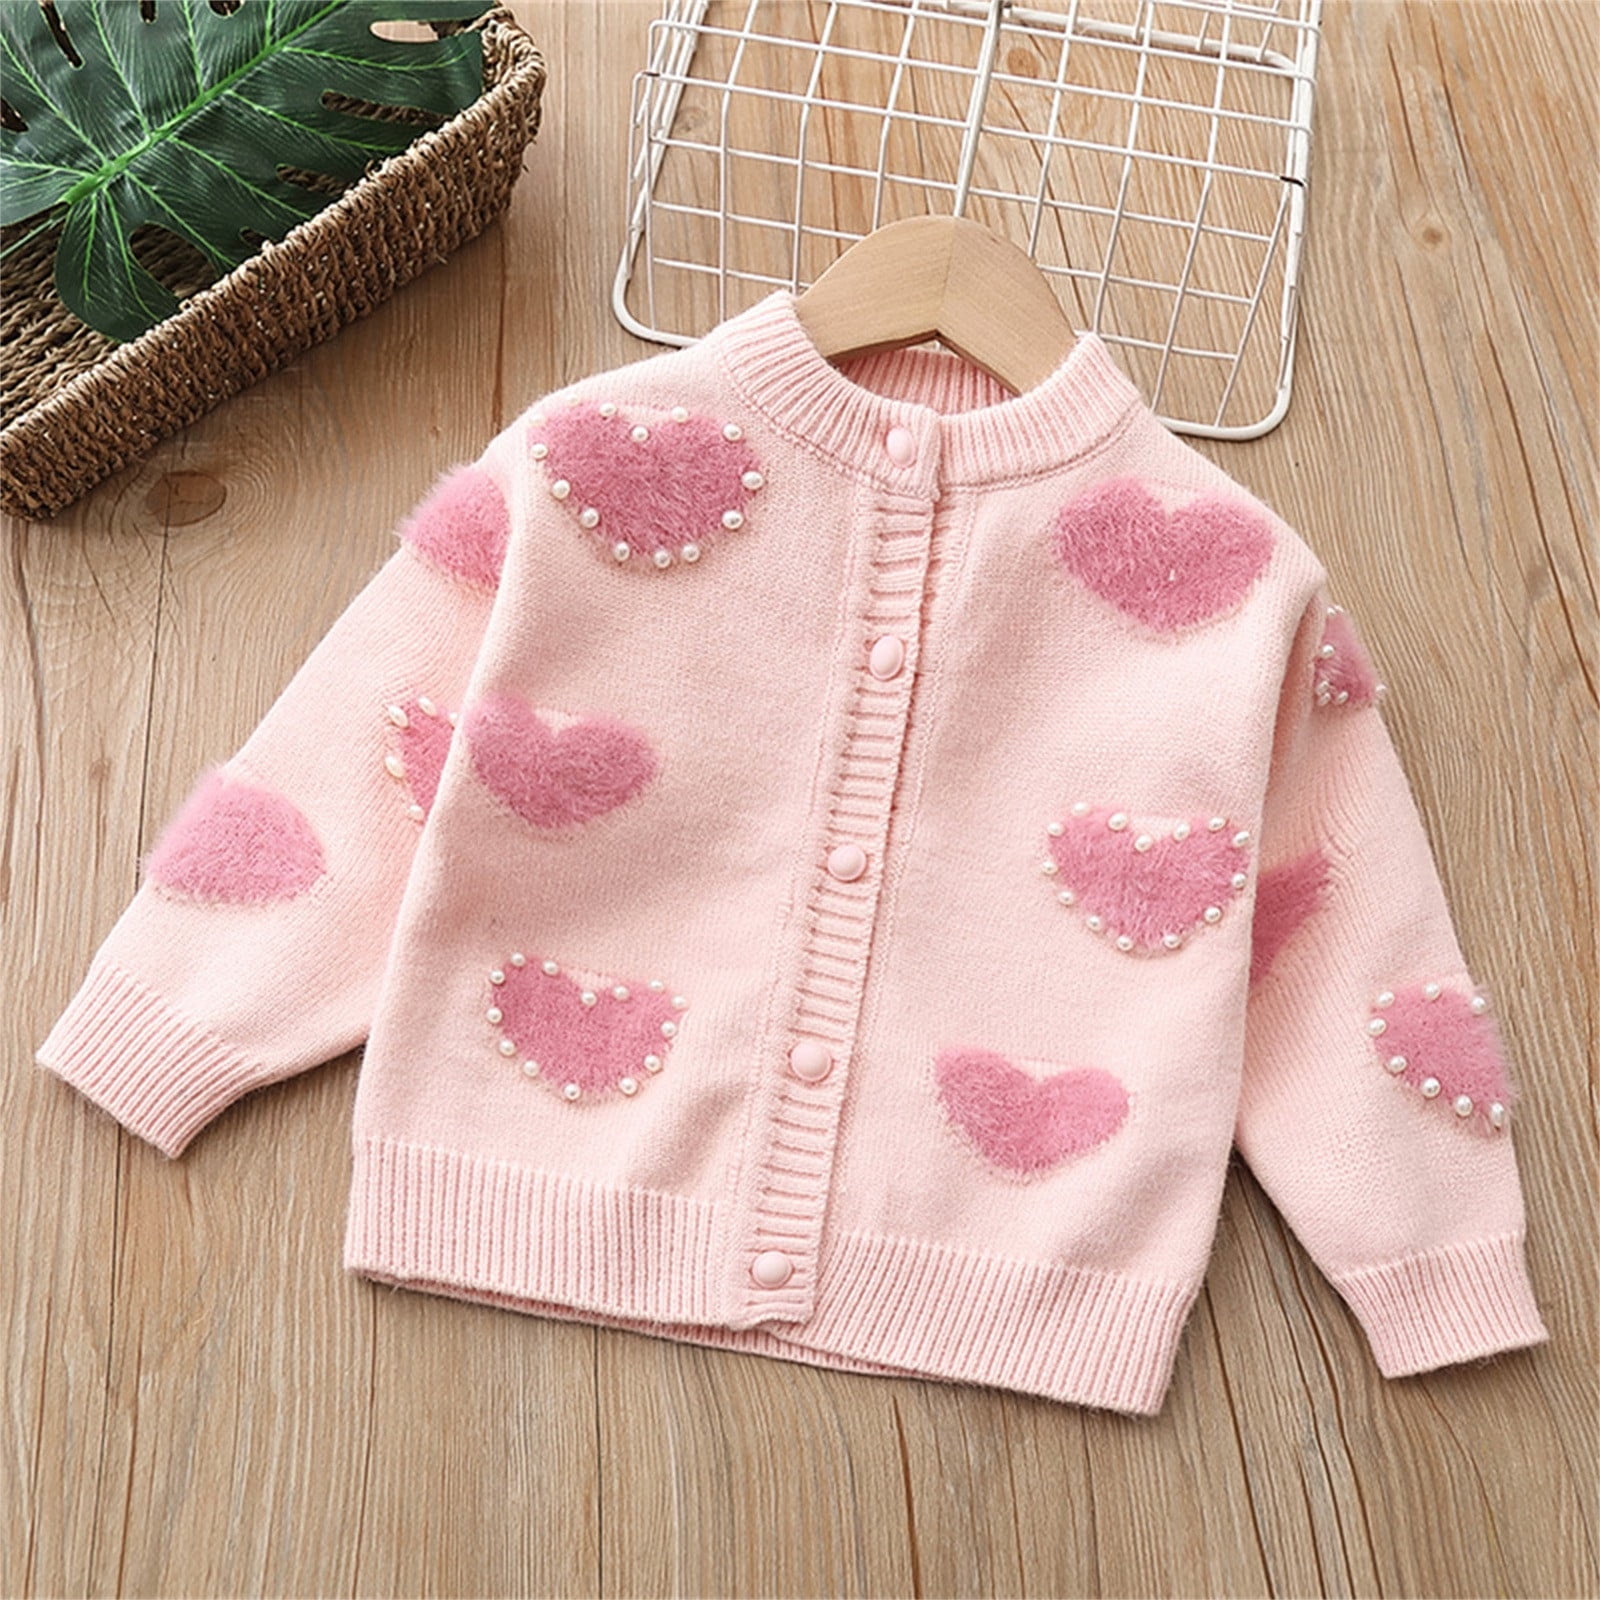 Cozy Knitted Sweater Jacket For Baby Boys And Girls Zipper Closure, Perfect  For Autumn And Winter Soft And Cozy Kids Clothing Stores From Ugzmp, $35.18  | DHgate.Com